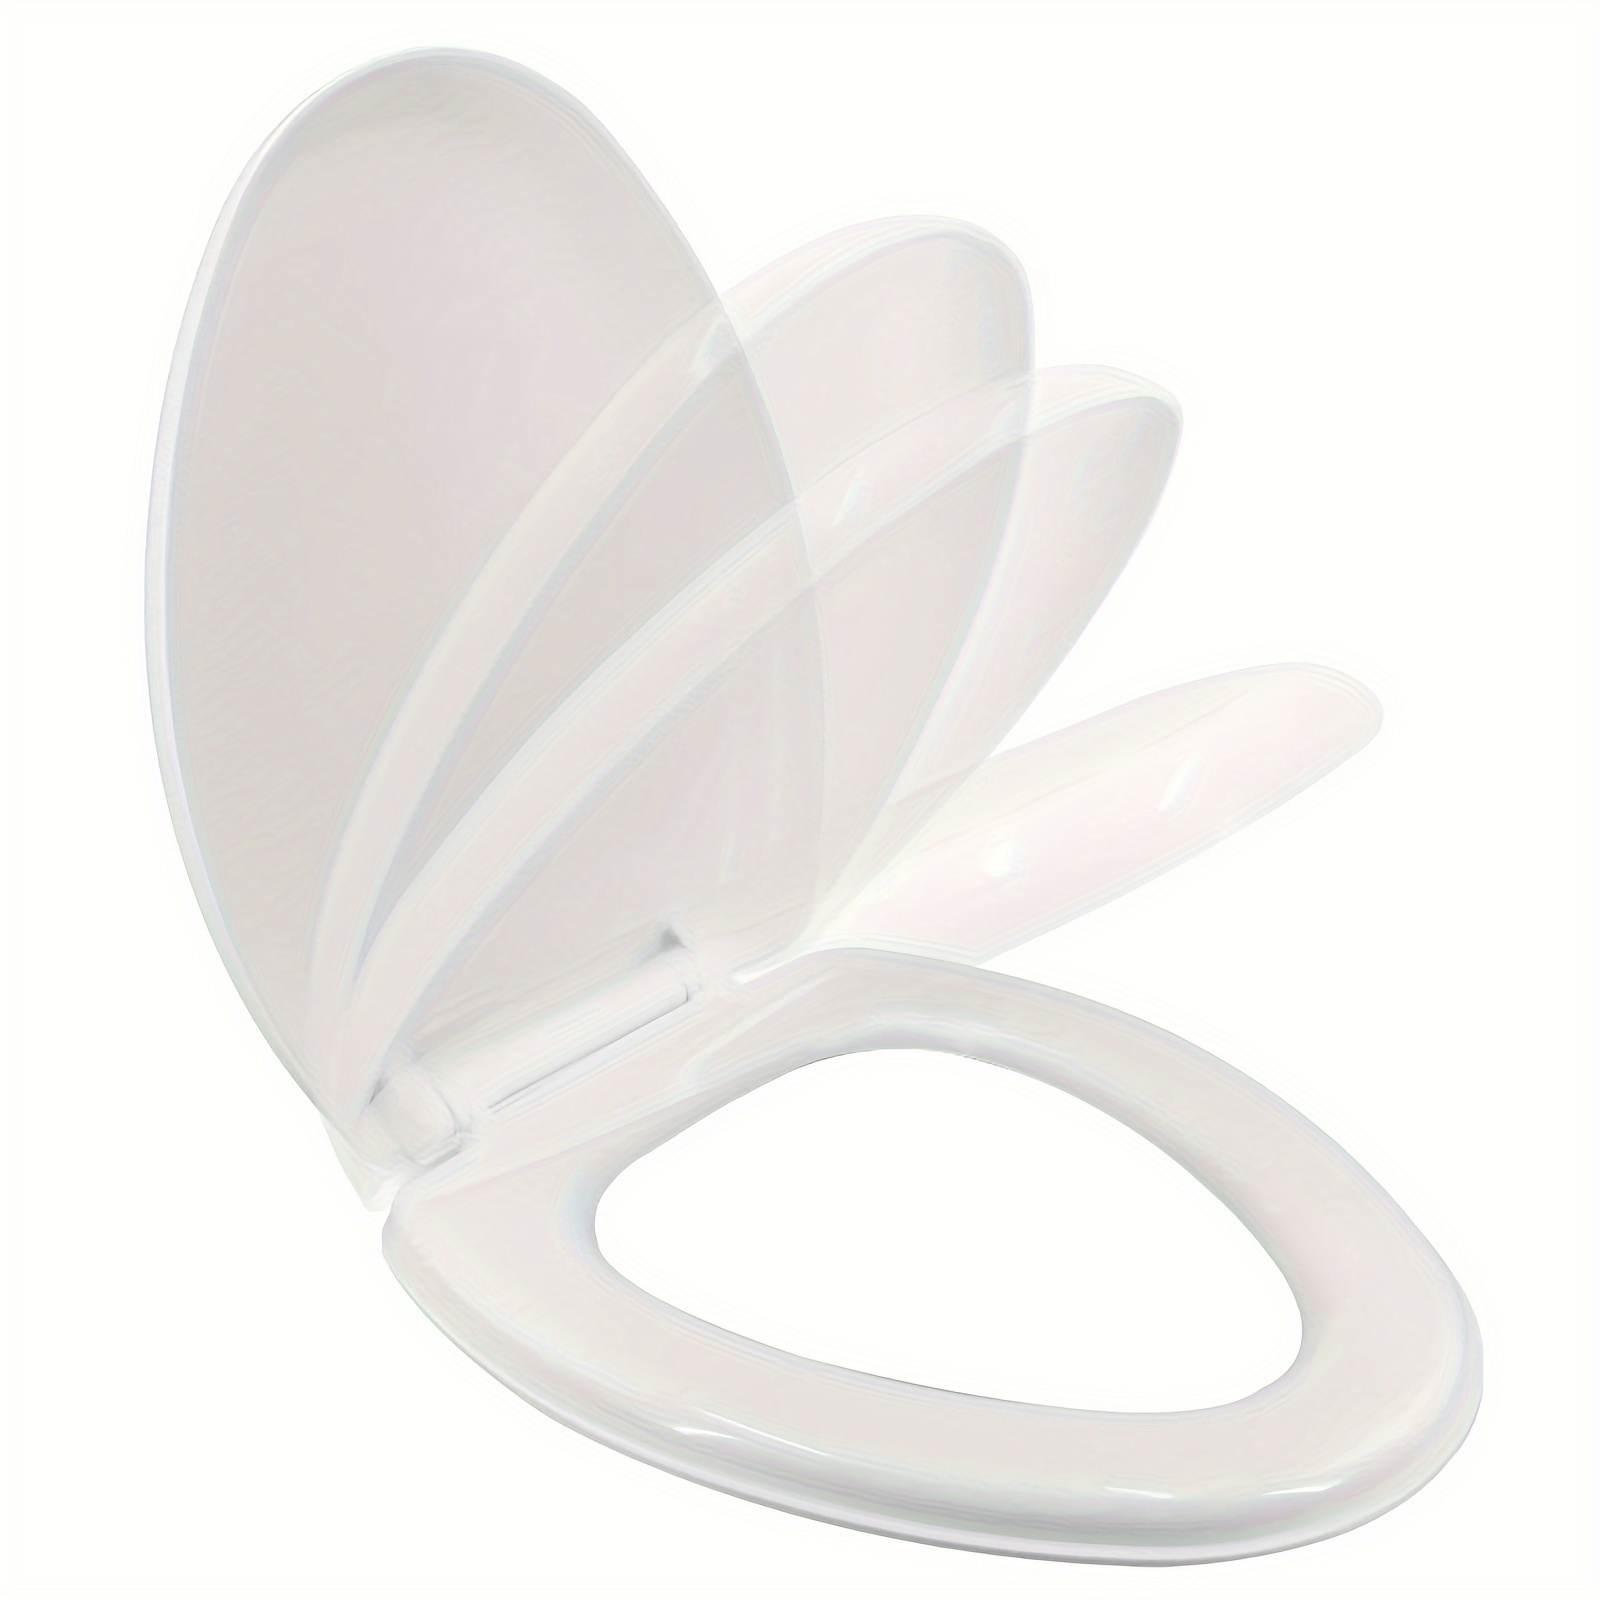 

1pc White Toilet Cover Toilet Seat, Plastic Household Thickened And Durable Toilet Seat, Covered Slow-lowering Silent Toilet Seats Are Available In 3 Shapes, Easy To Install, Bathroom Accessories